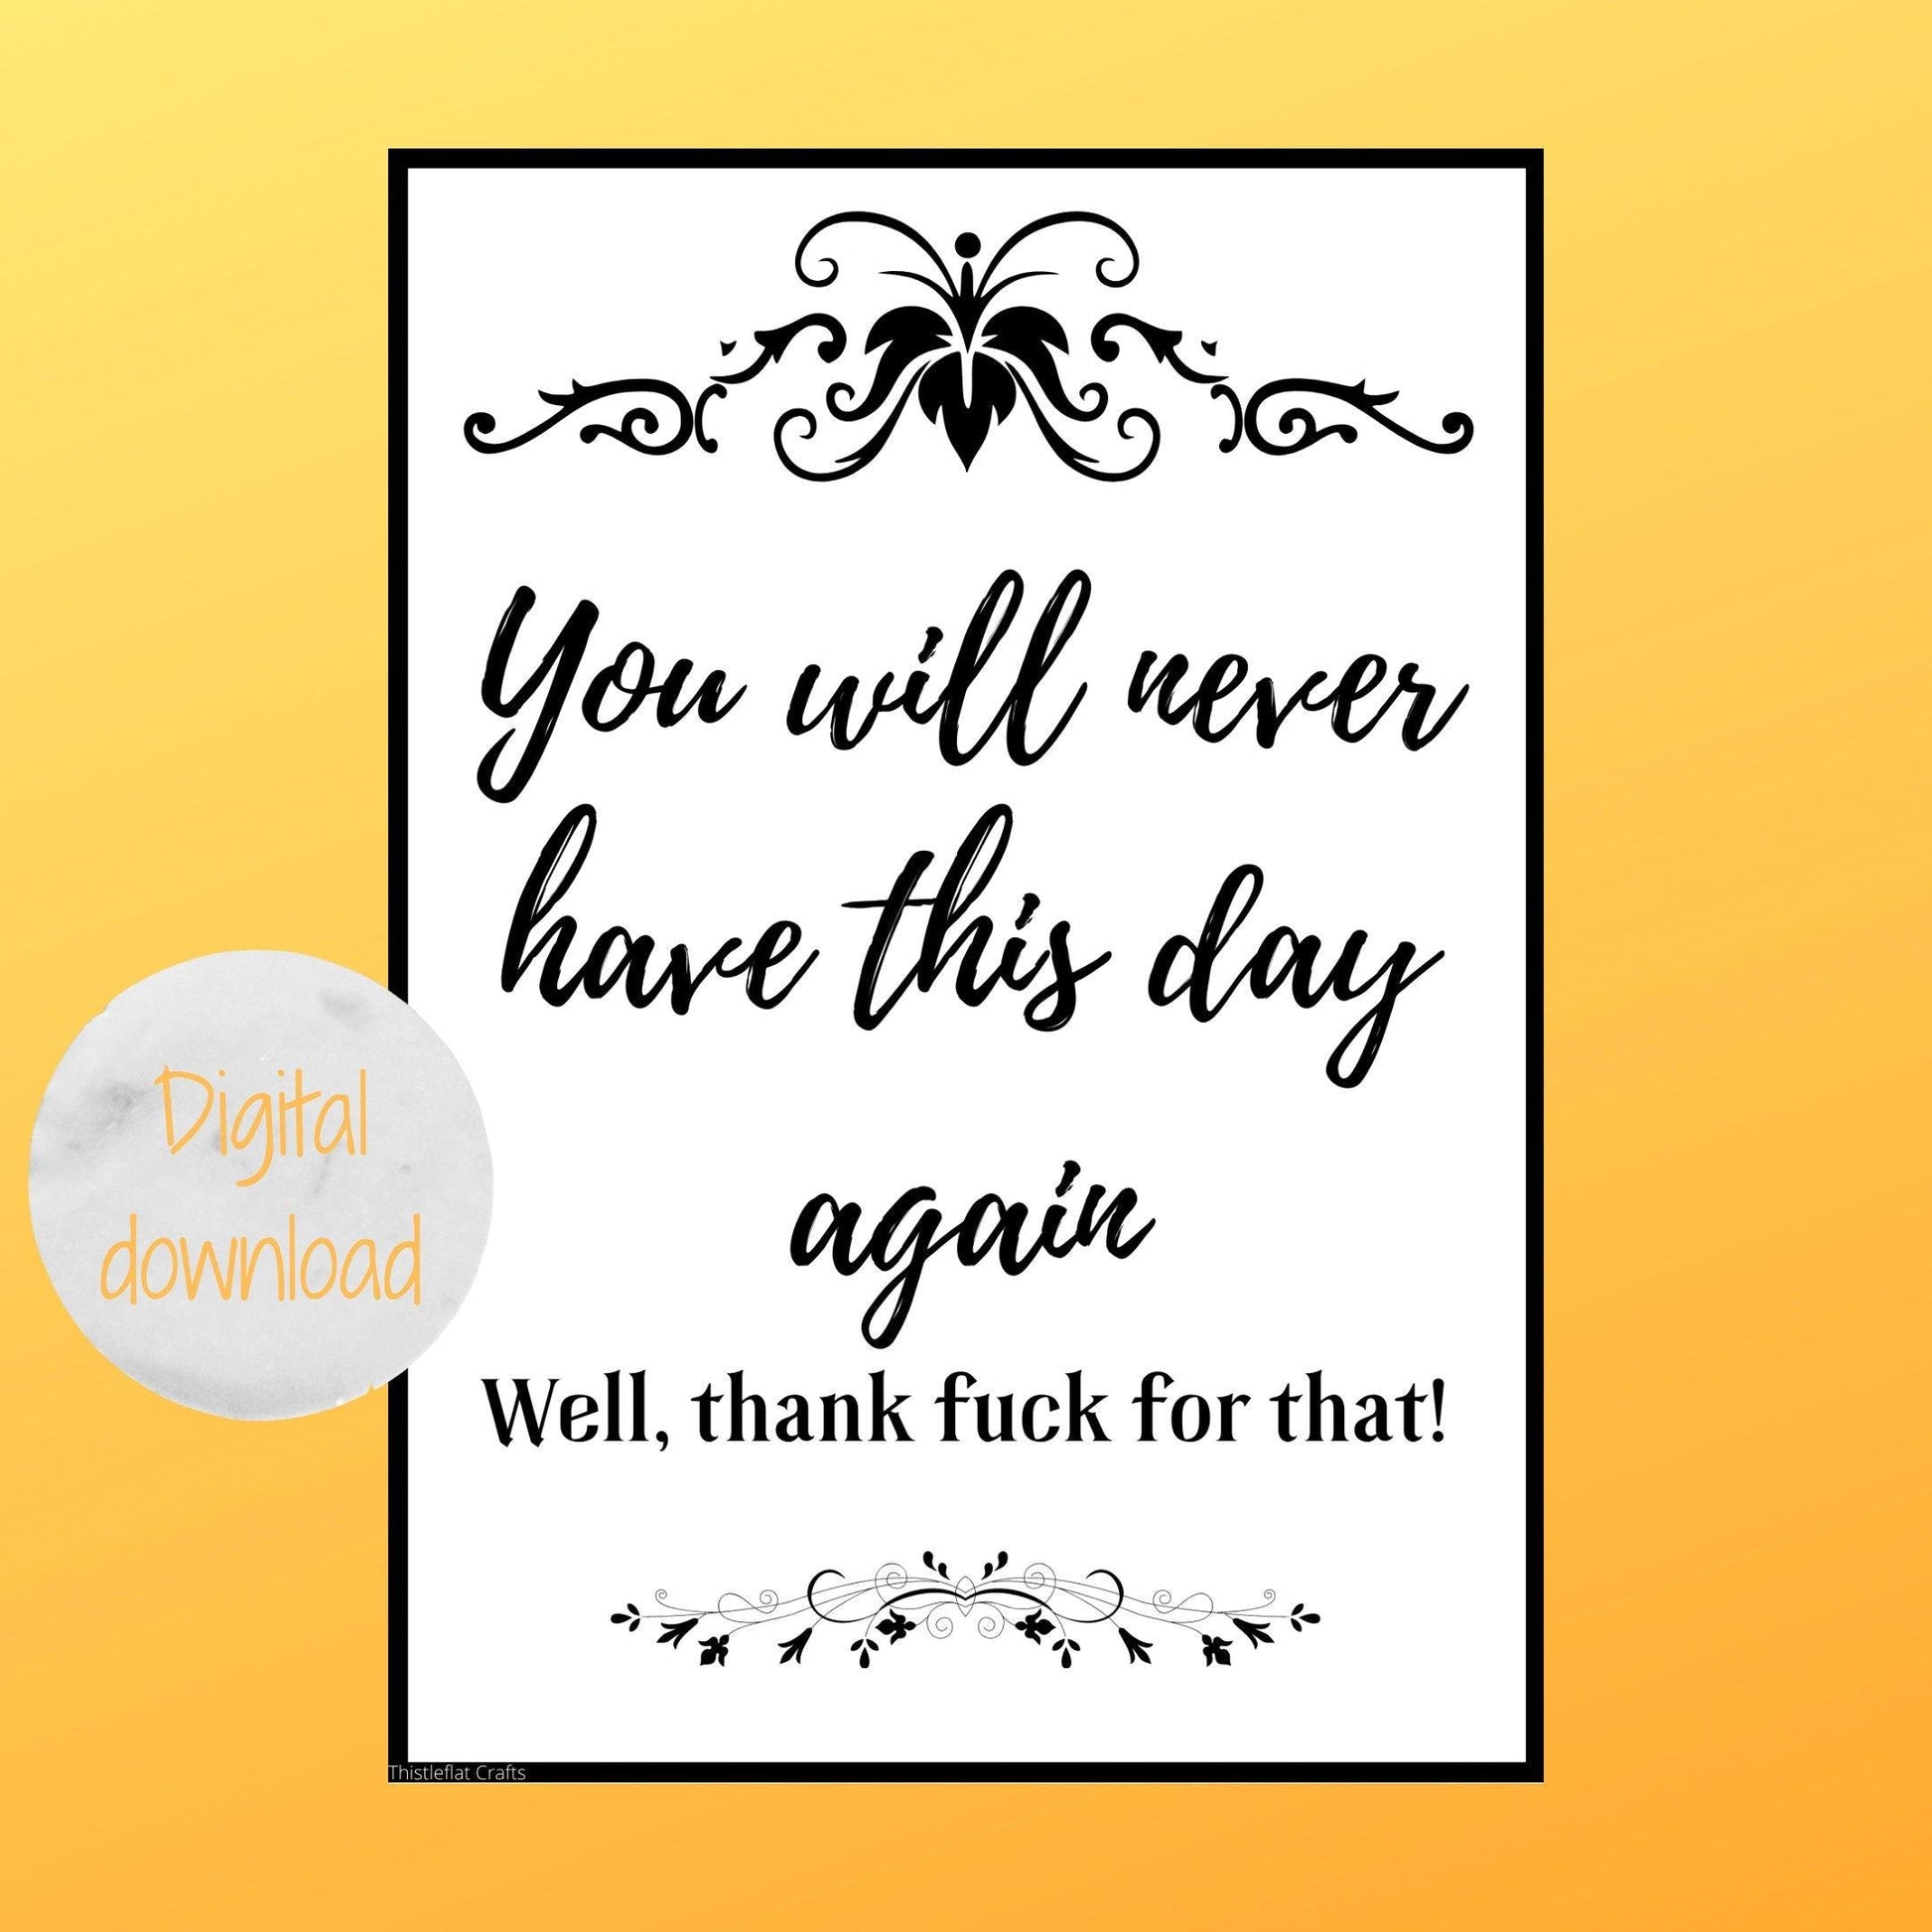 Digital download image, showing the text 'You will never have this day again. Well thank fuck for that!' Image is black and white and has a decorative scroll border     